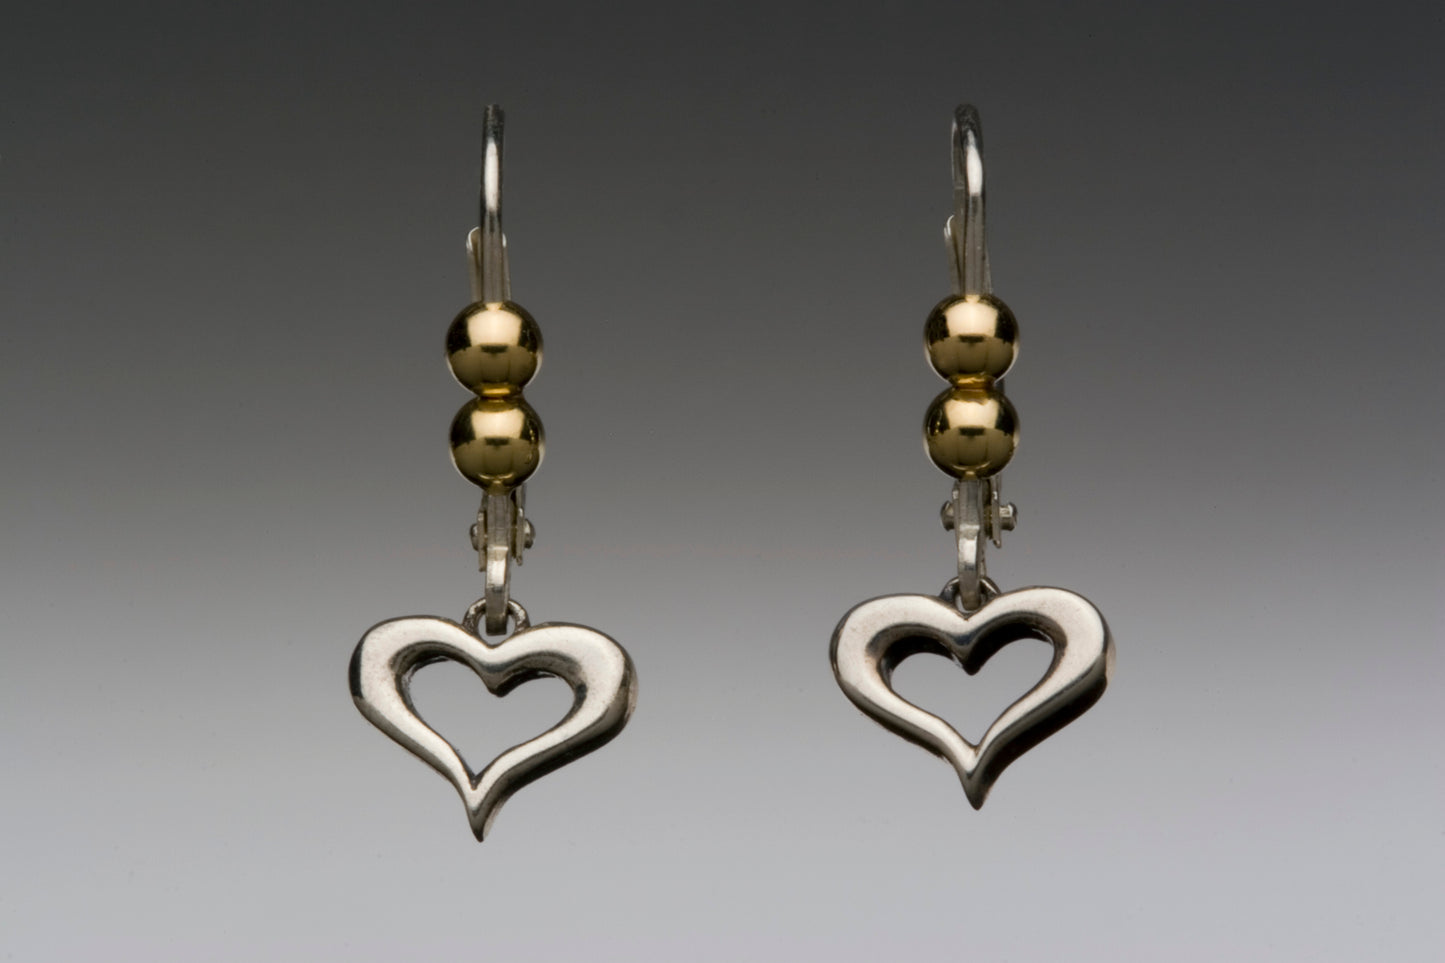 Tiny heart earrings with gold beads